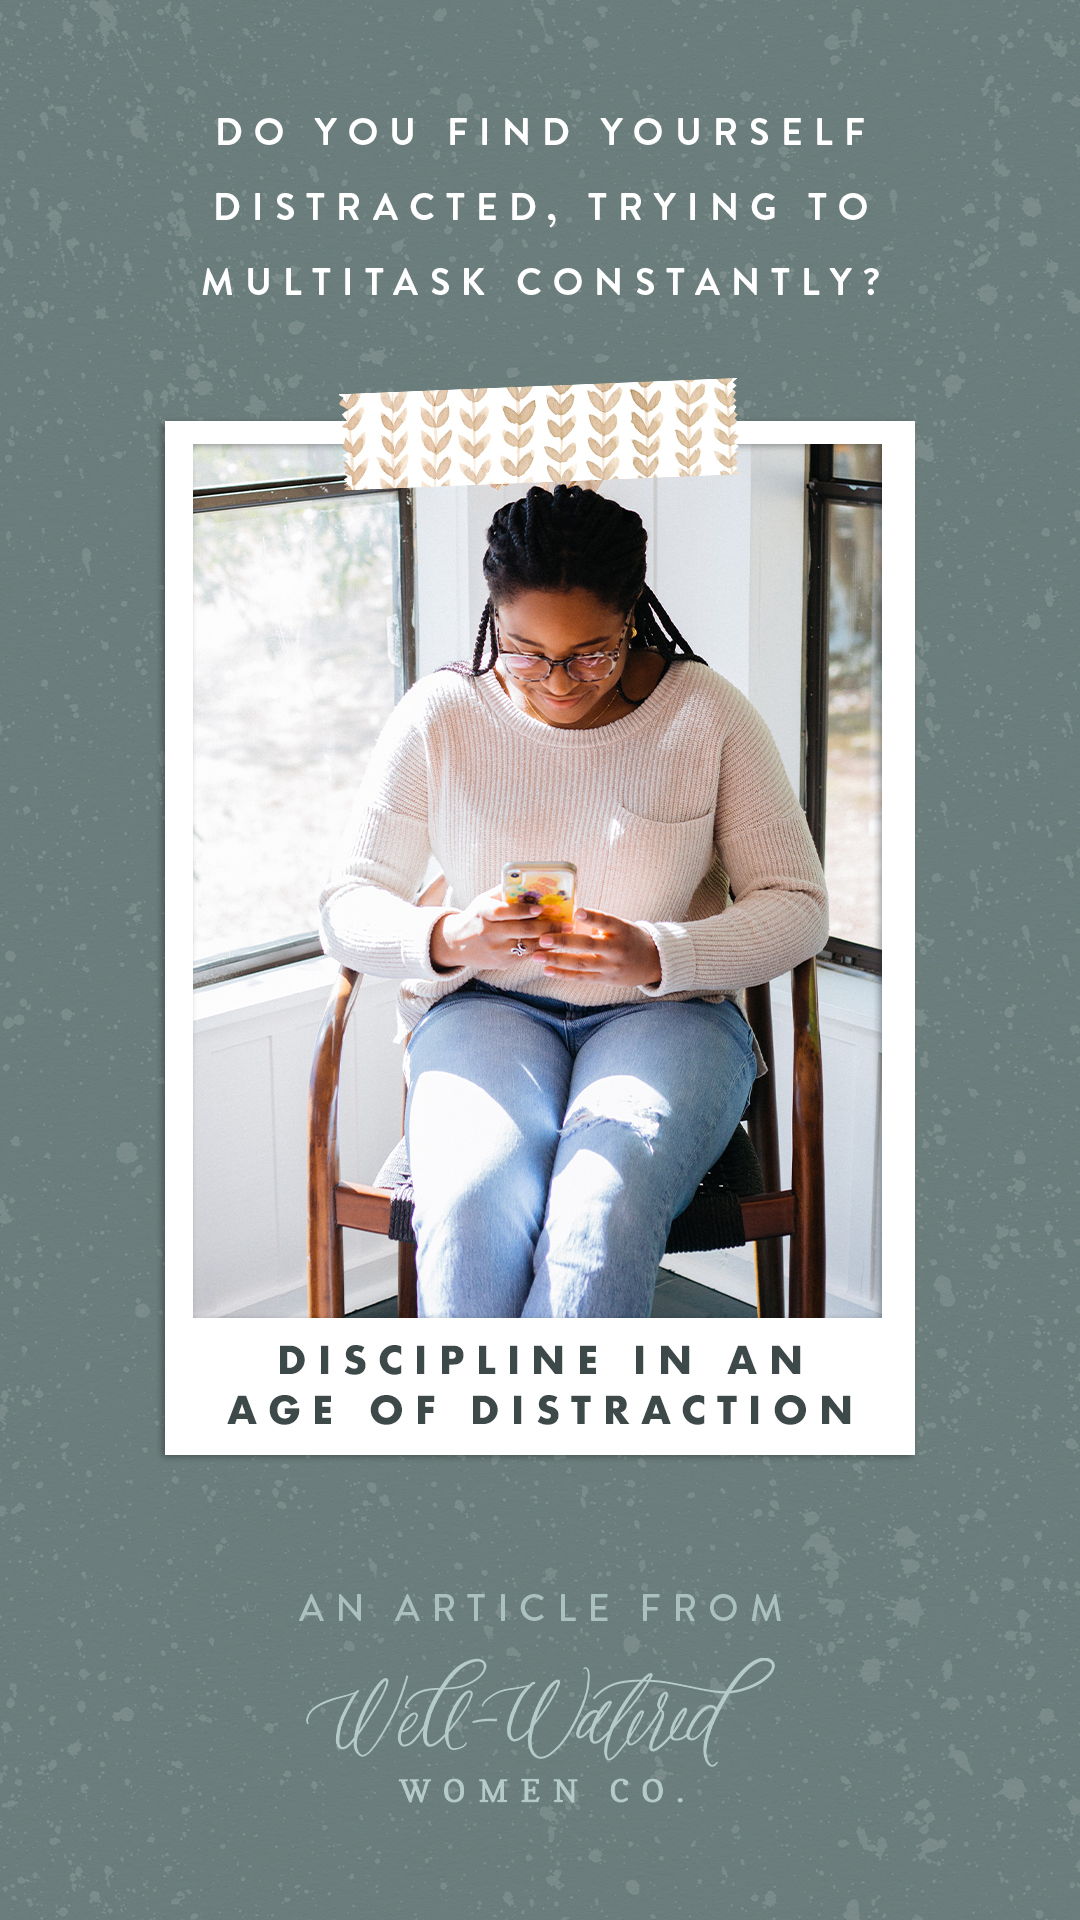 Discipline in an Age of Distraction - An Article by Well-Watered Women